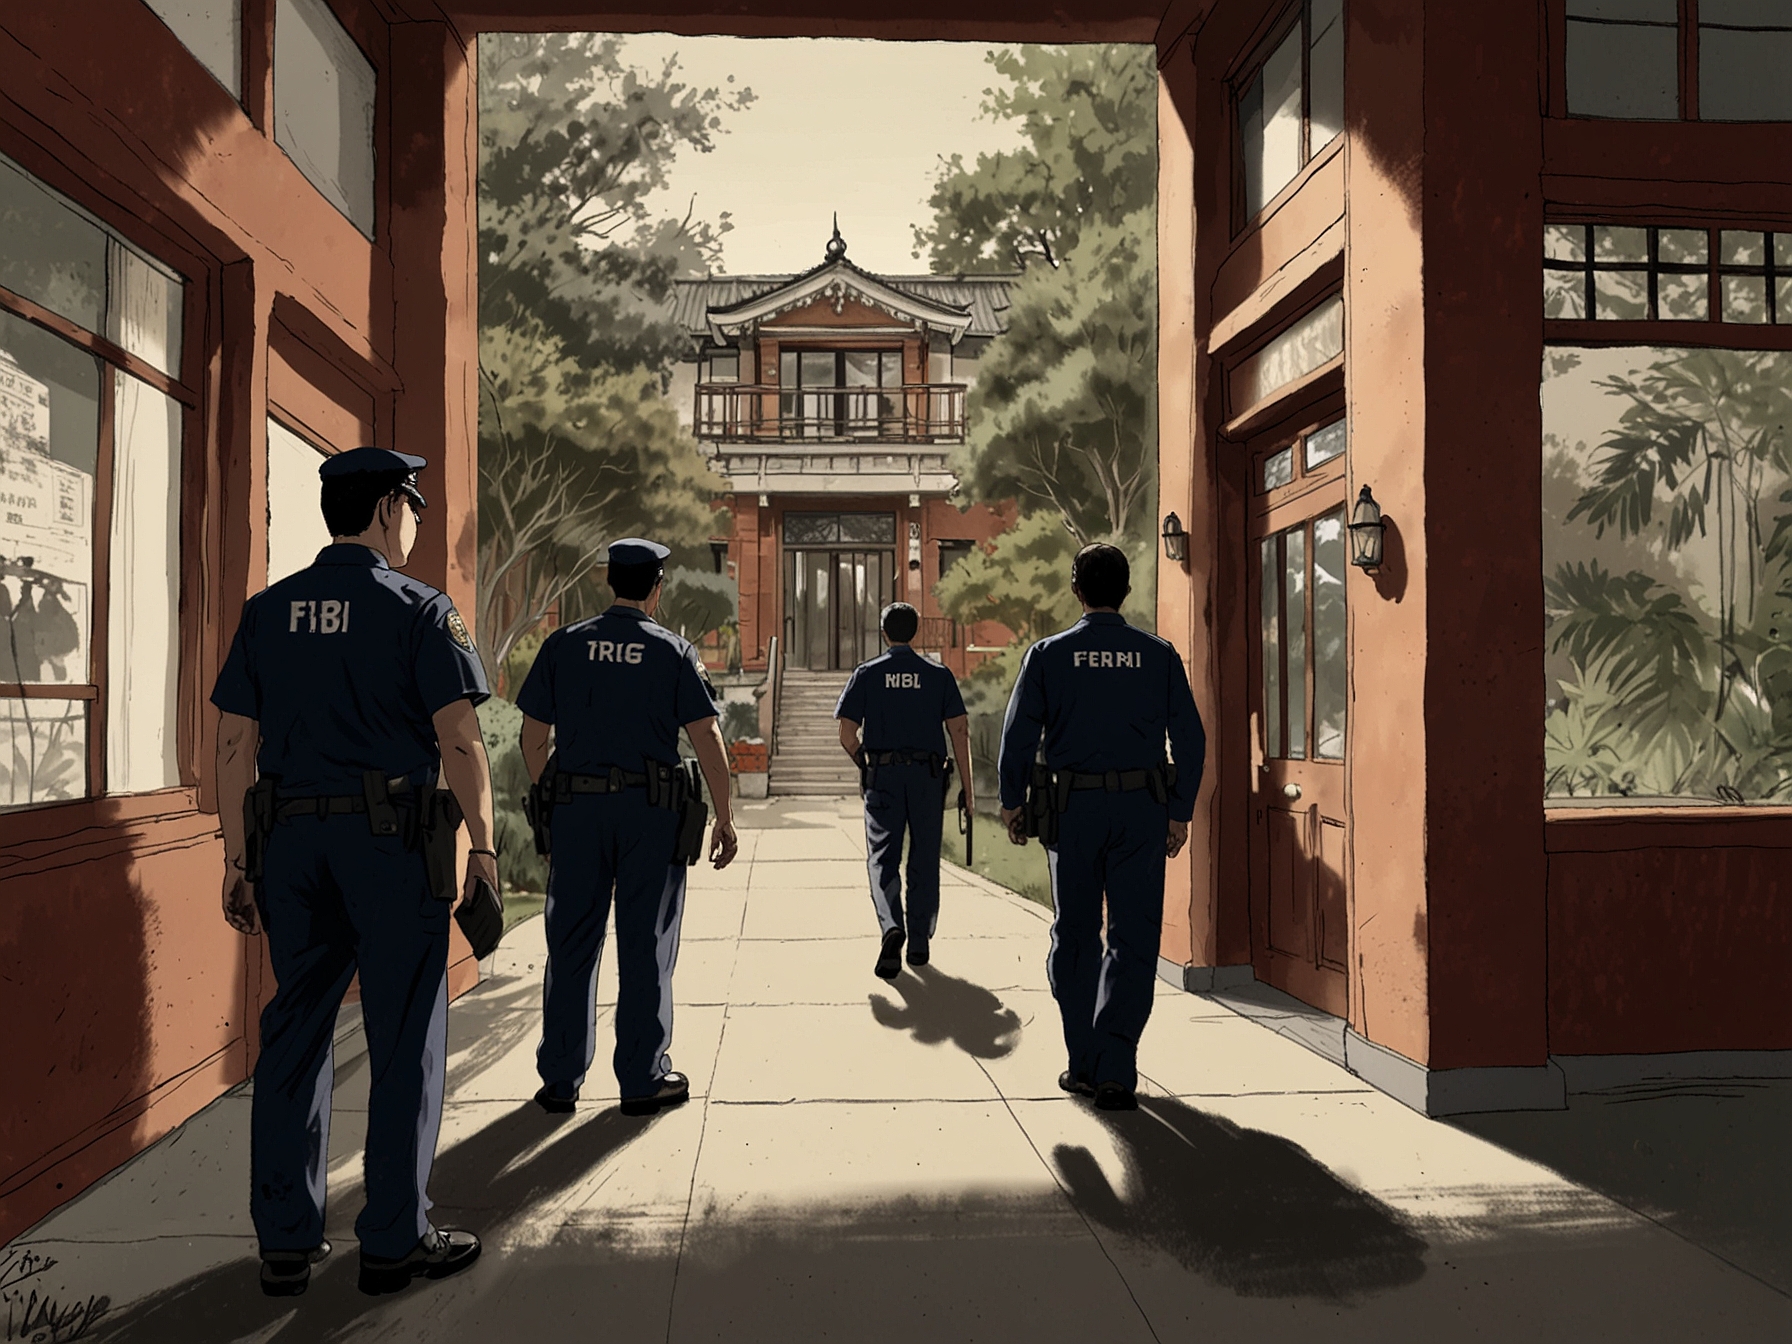 A view of Mayor Sheng Thao's residence, showing FBI agents conducting a search. This high-profile operation has stirred public curiosity and speculation.